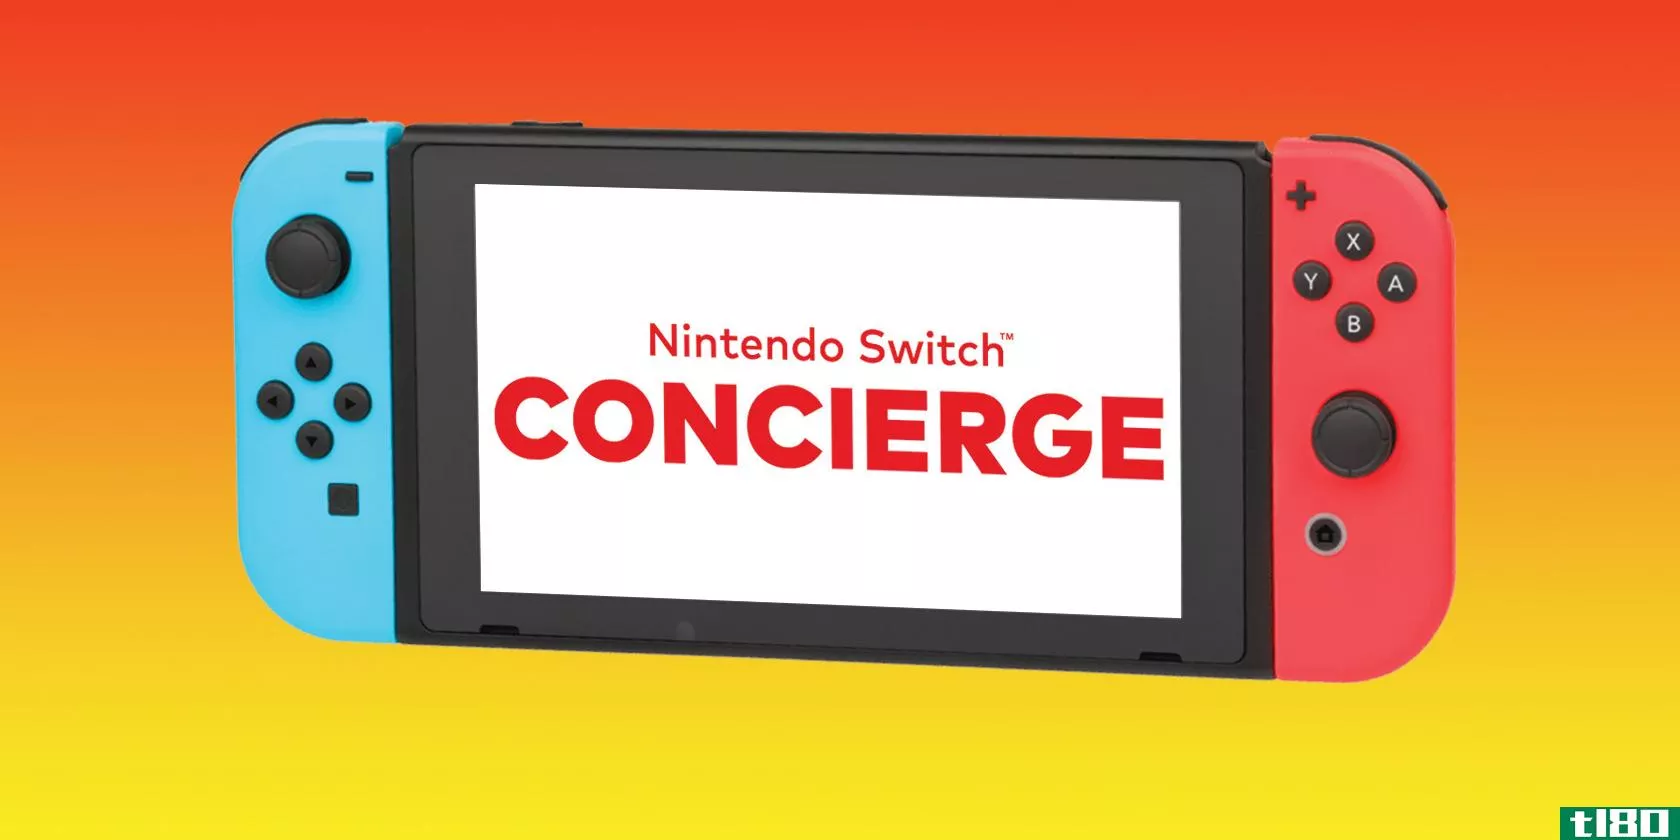 switch c***ole with concierge logo on screen